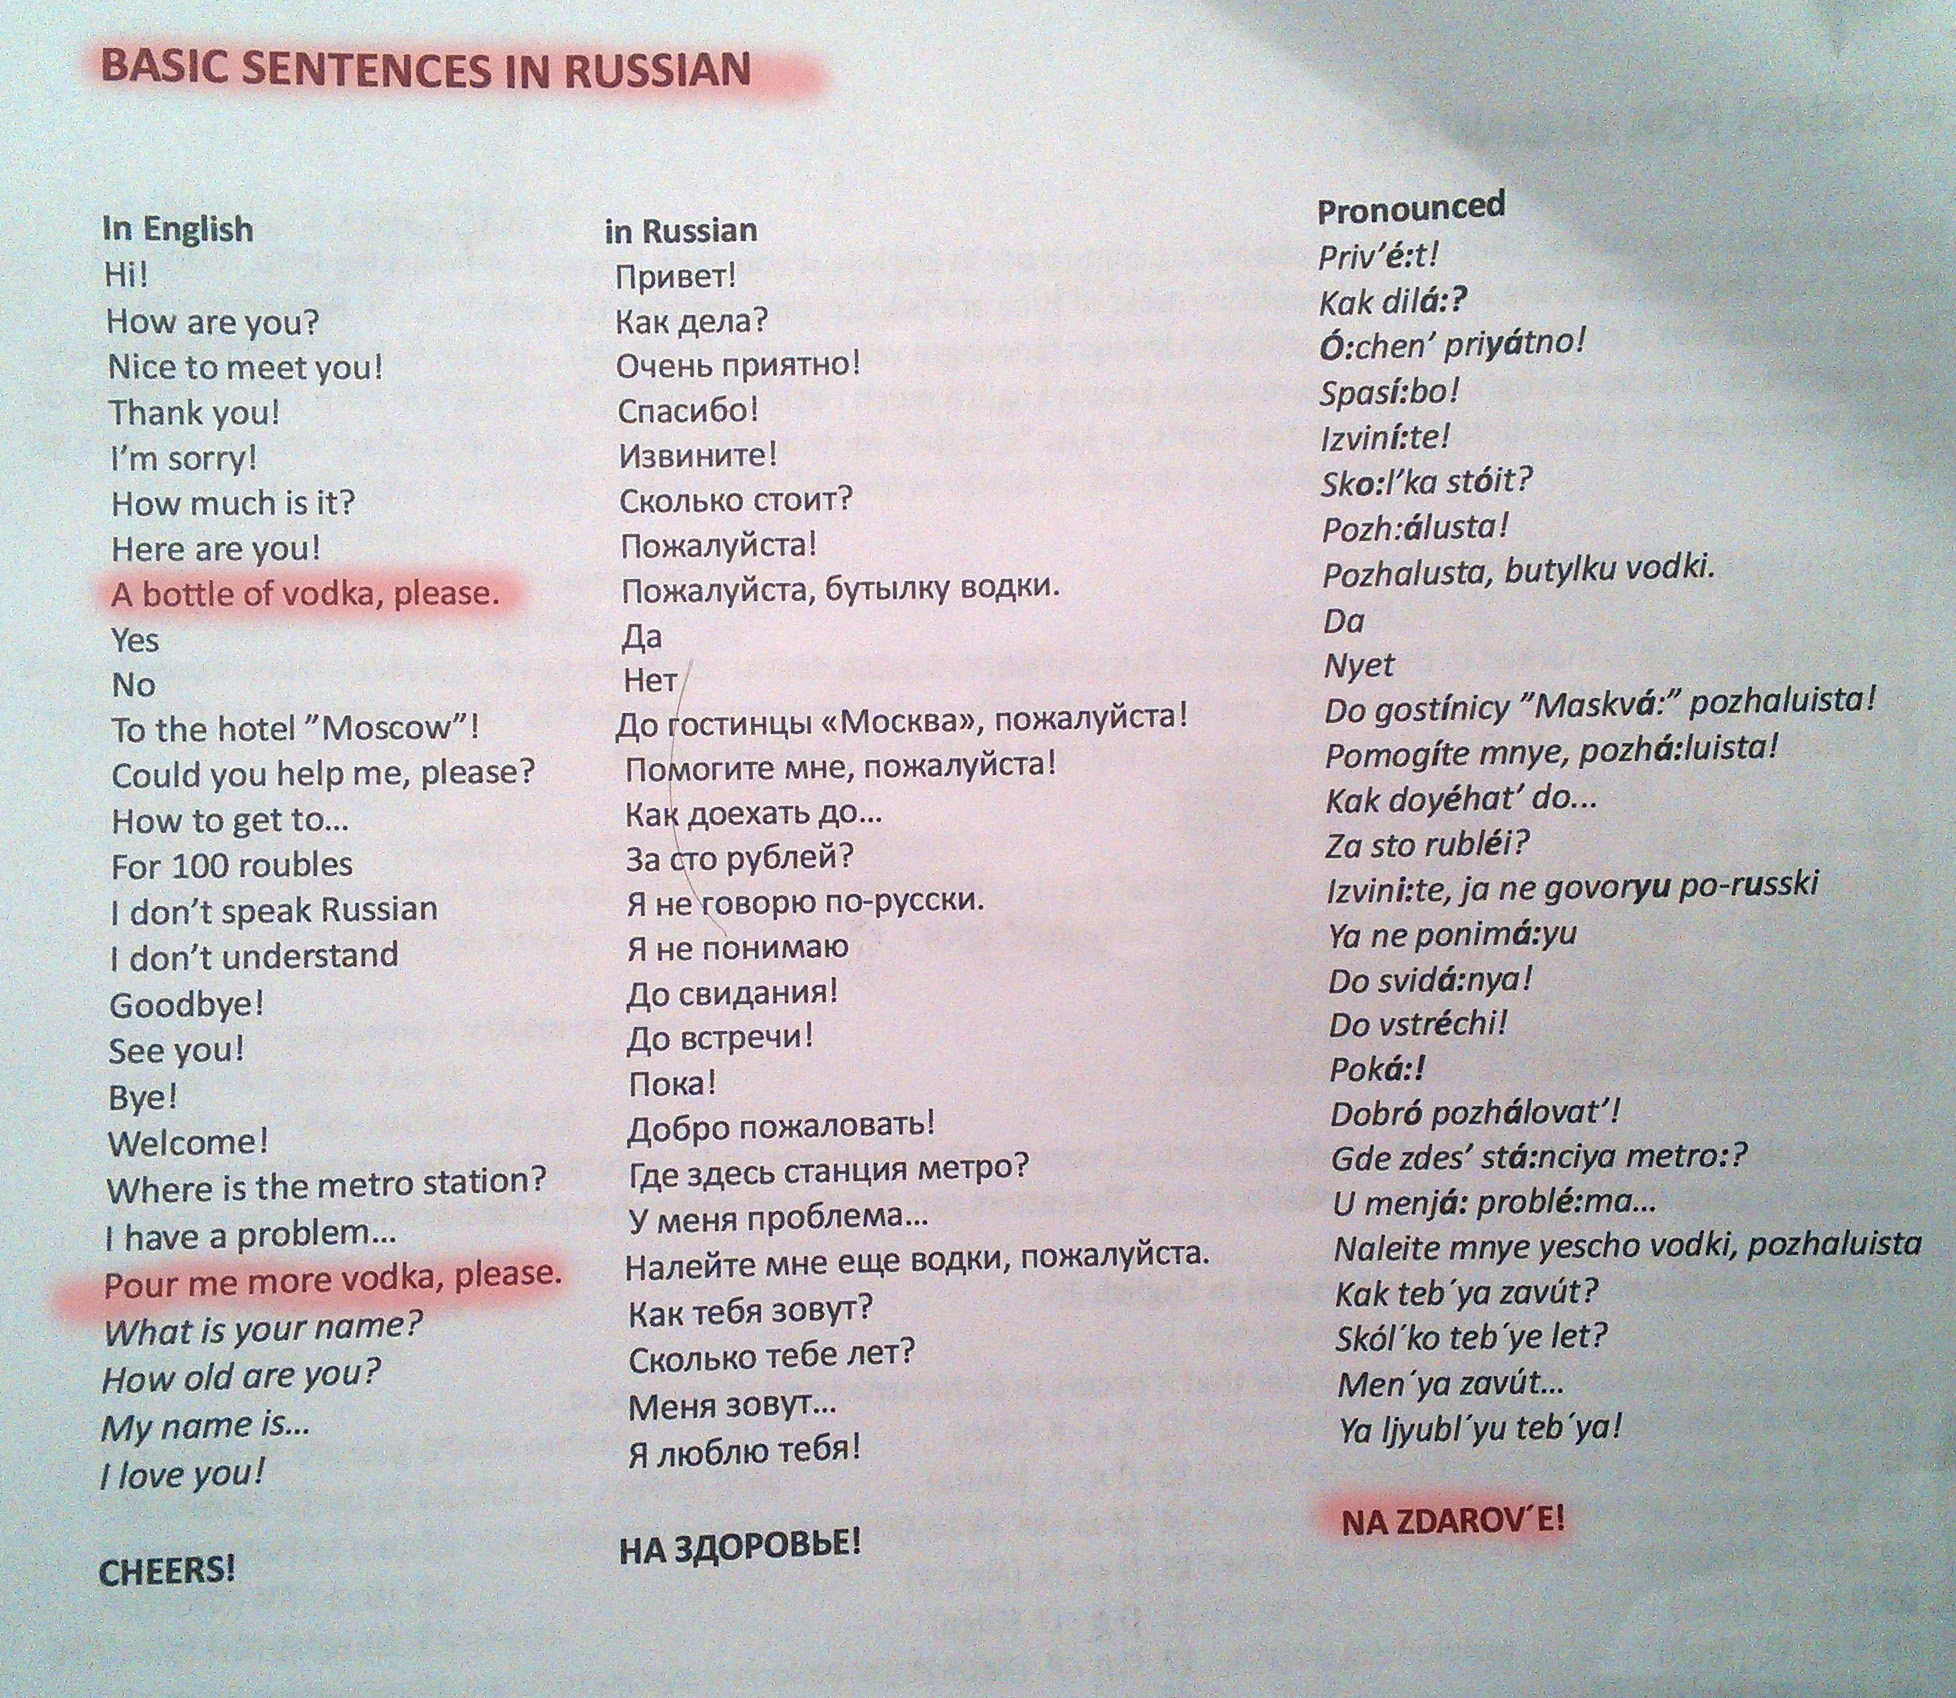 Some Russian words